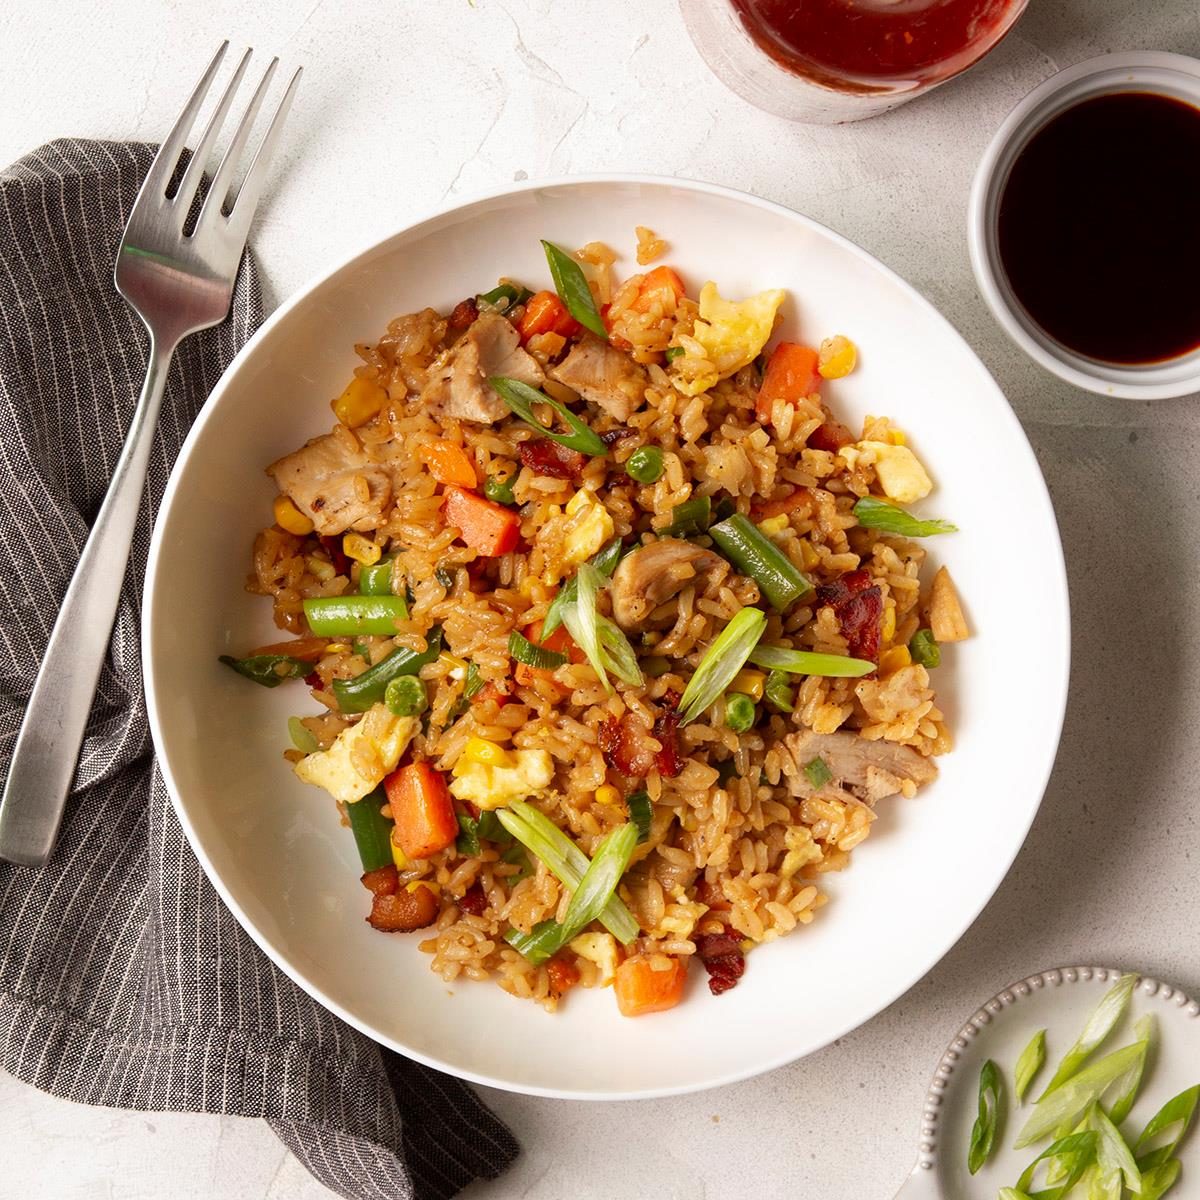 Tuesday: Easy Fried Rice